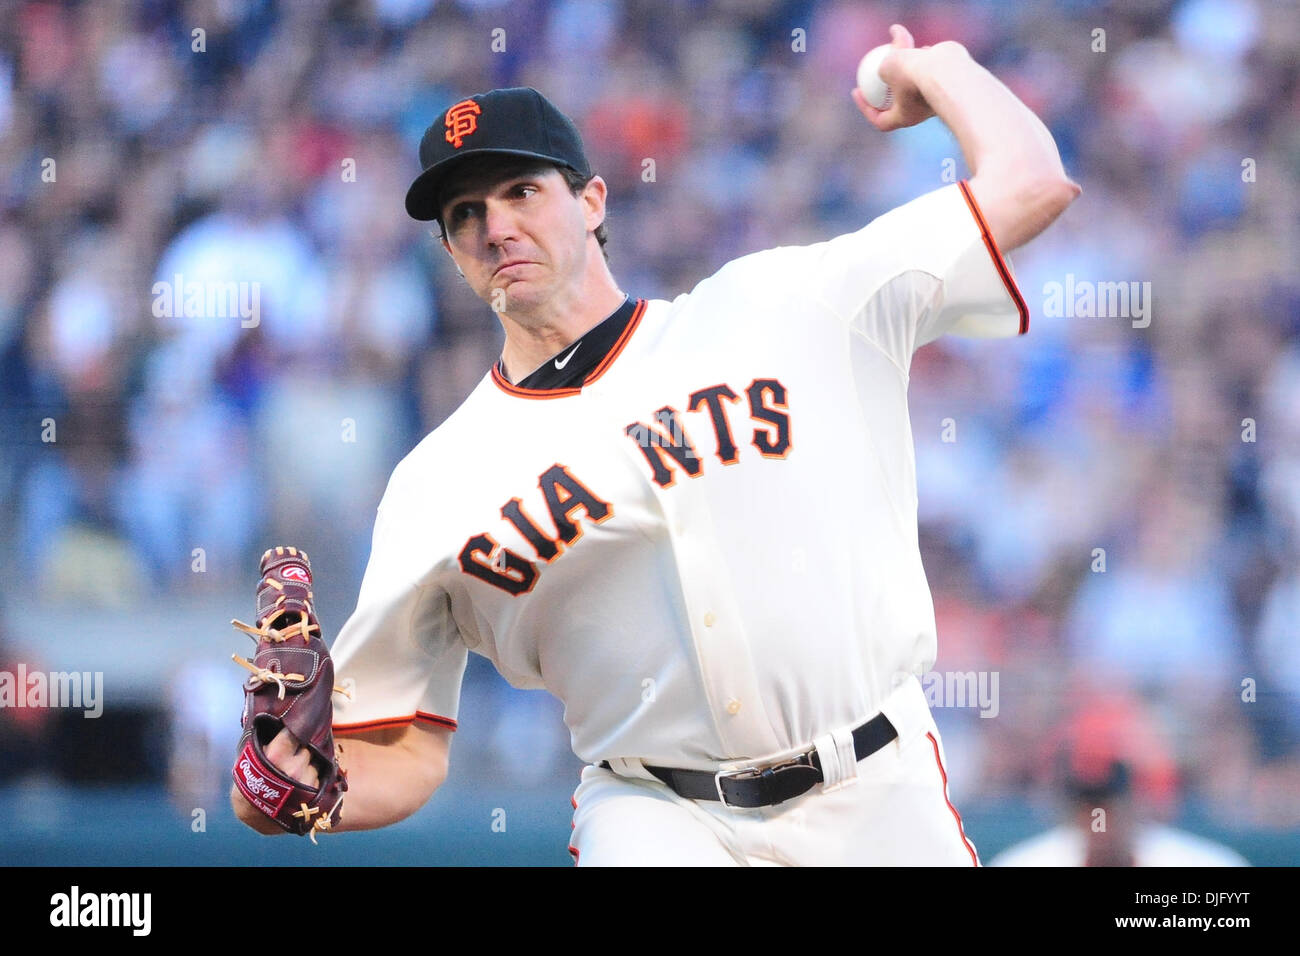 San Francisco, CA: San Francisco Giants pitcher Barry Zito (75) pitches the ball. The Los Angeles Dodgers won the game 4-2. (Credit Image: © Charles Herskowitz/Southcreek Global/ZUMApress.com) Stock Photo